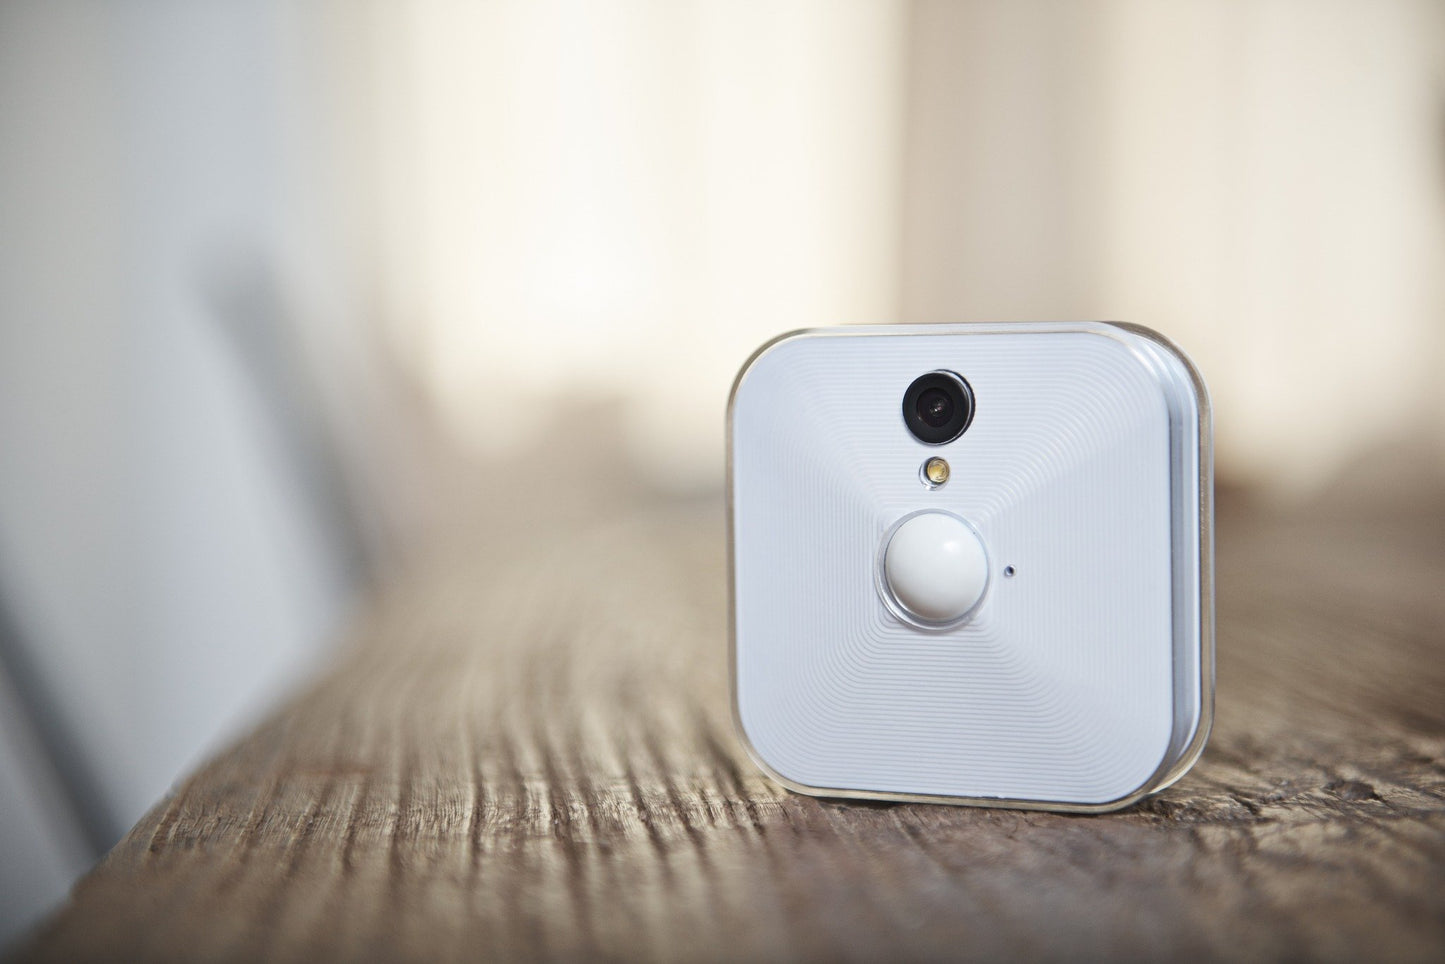 Add-on Blink Indoor Home Security Camera for Existing Blink Customer Systems